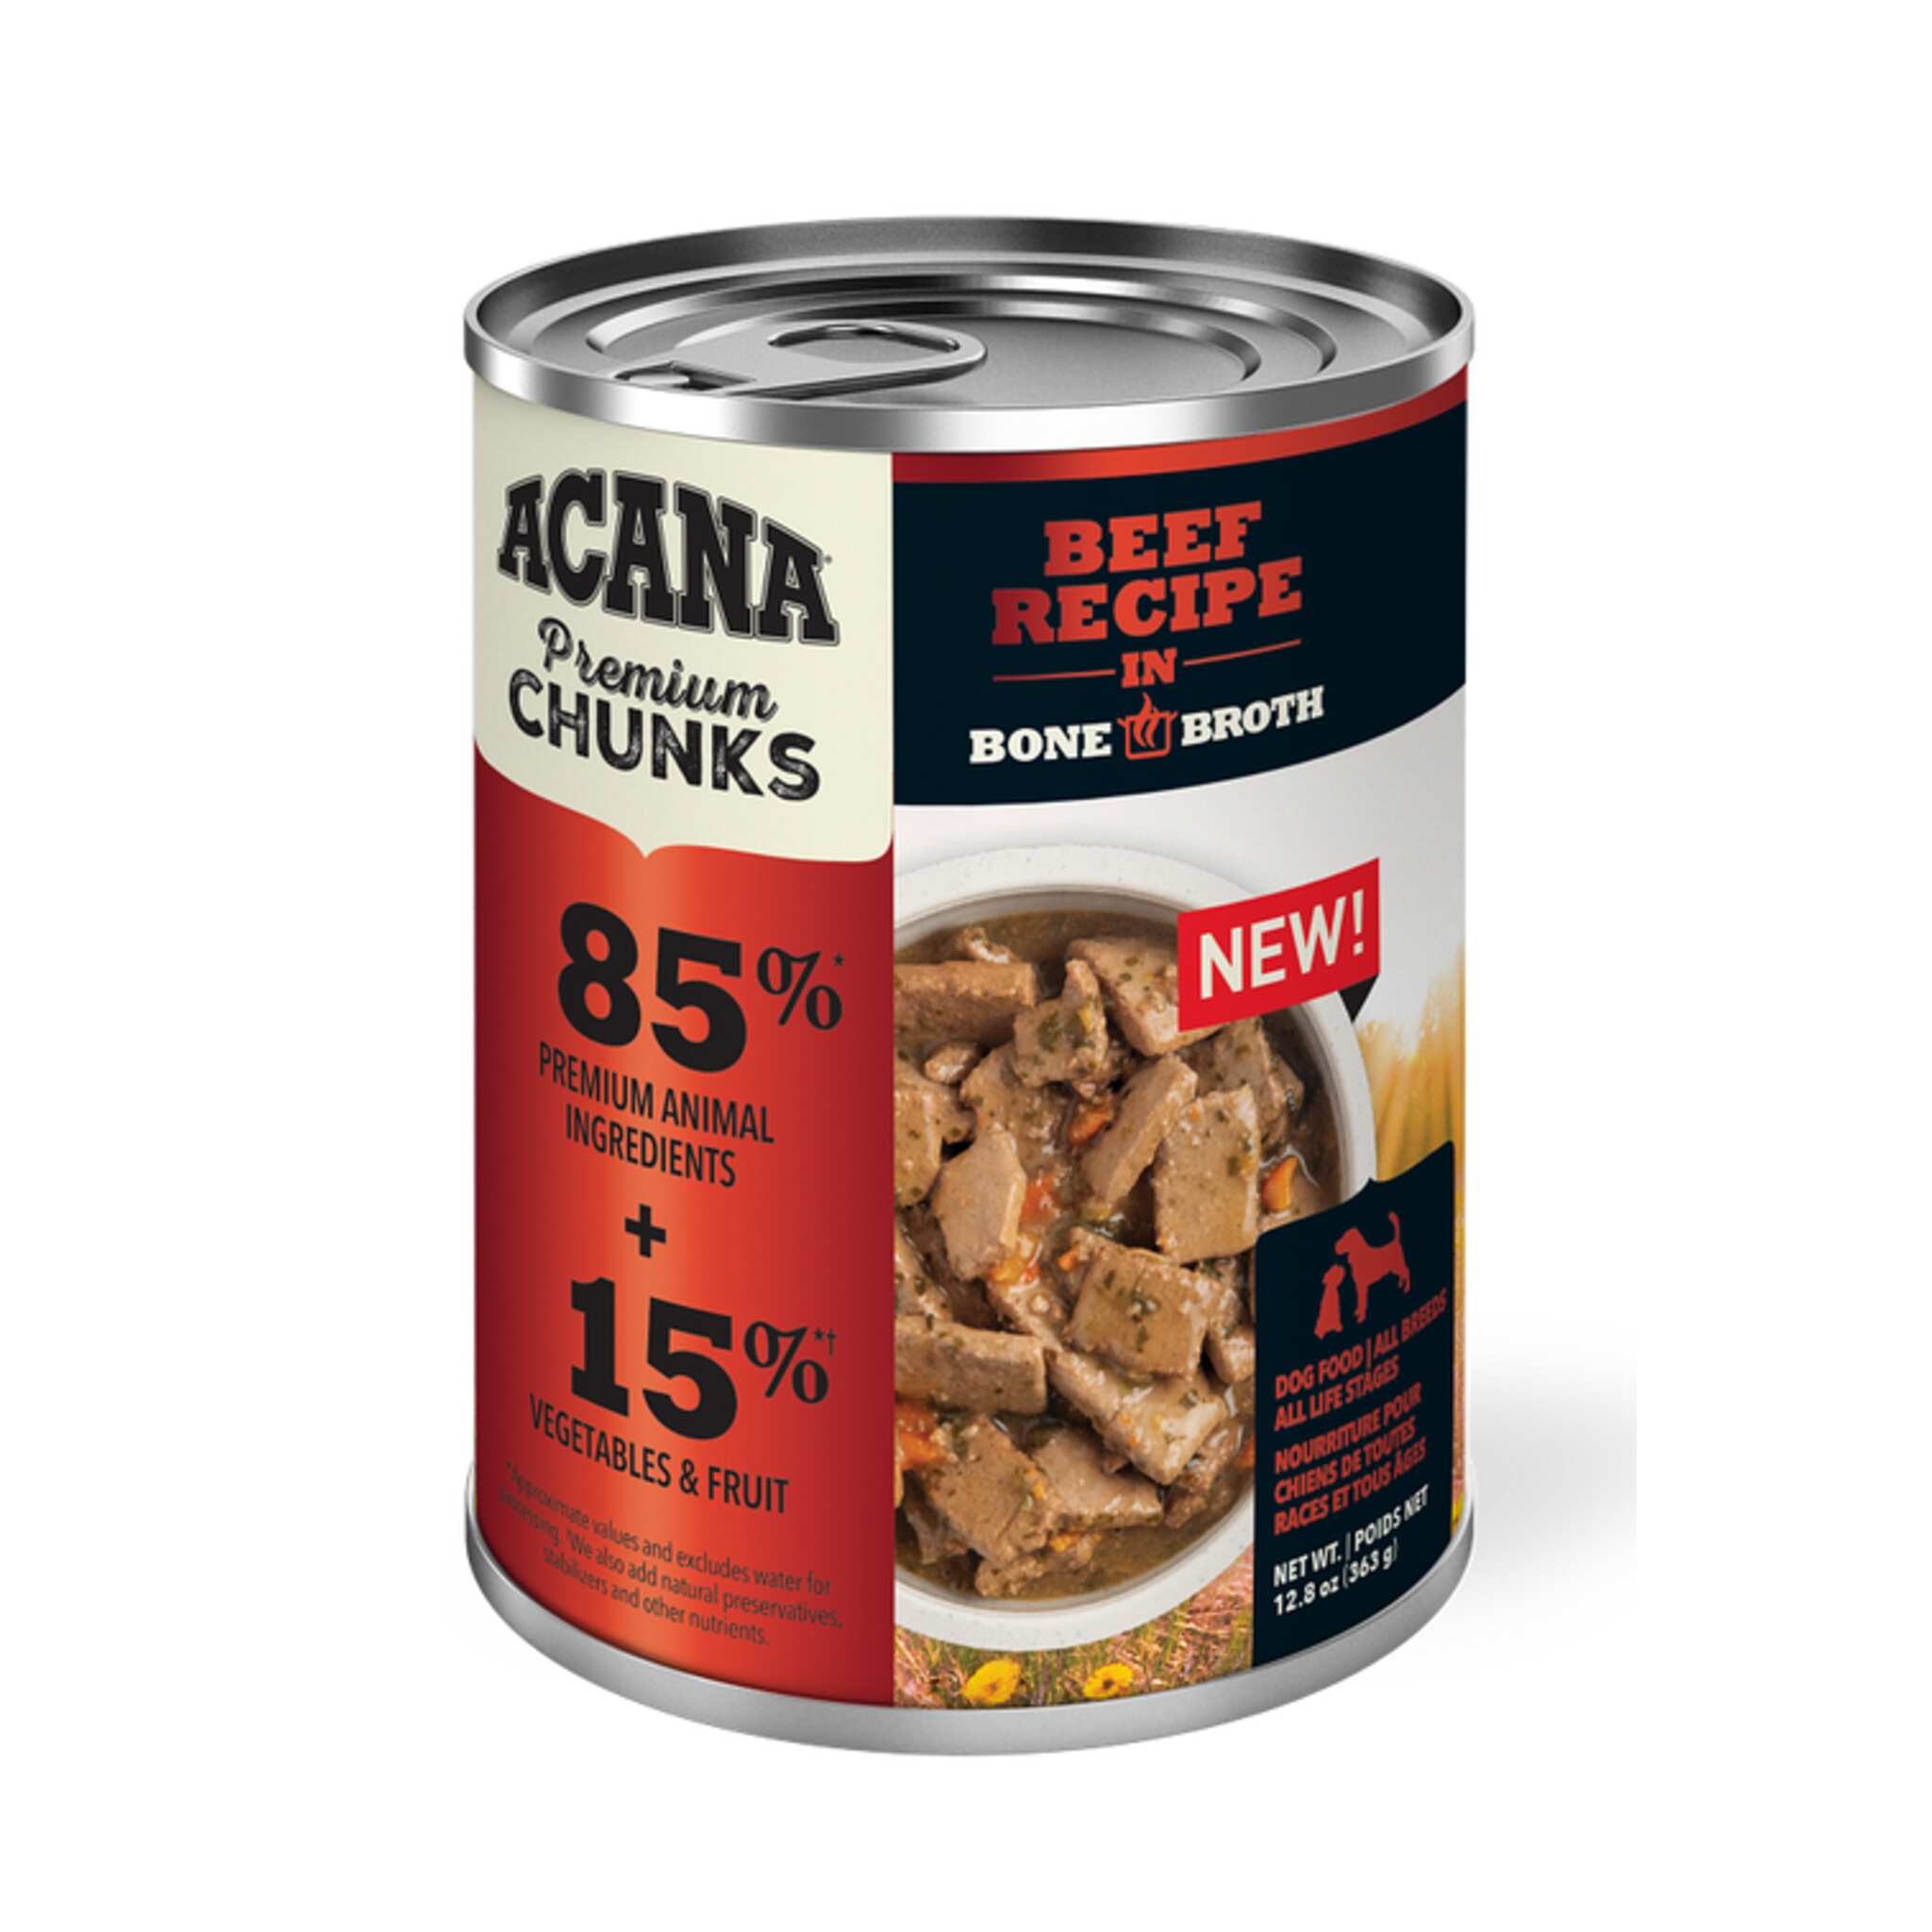 A can of Acana wet dog food, beef recipe, 12.8 oz.